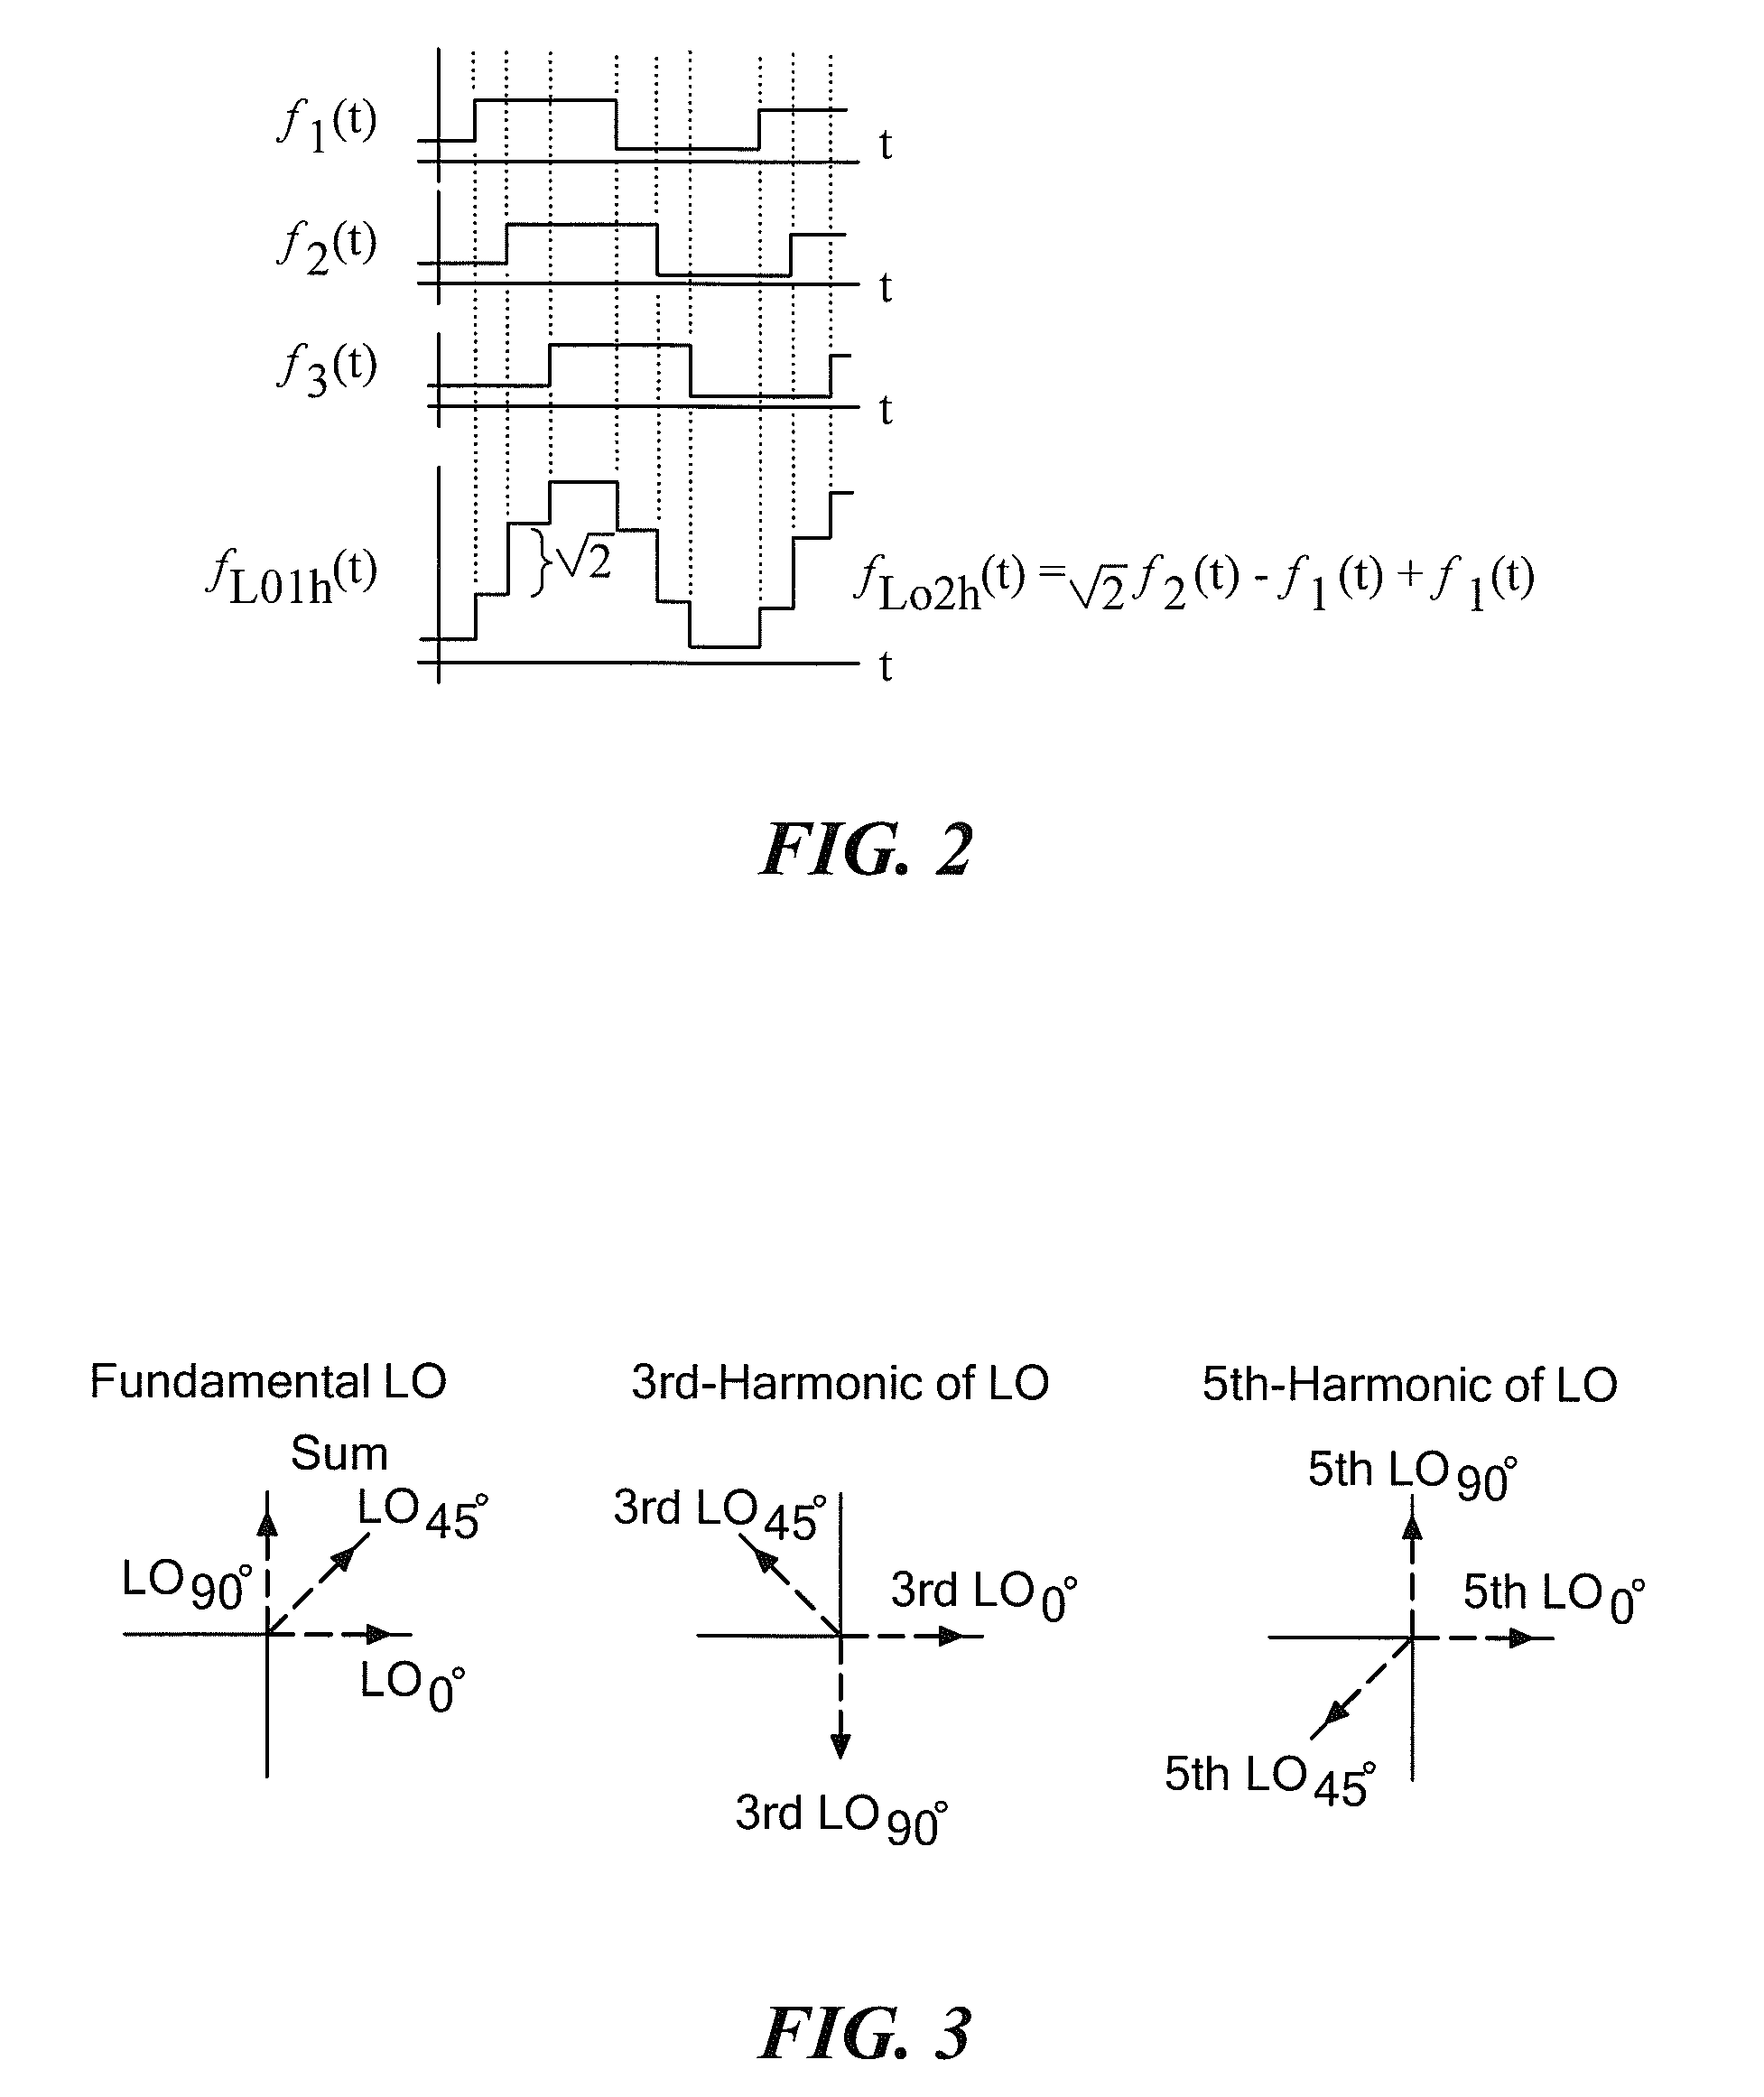 Harmonic reject mixer with active phase mismatch compensation in the local oscillator path